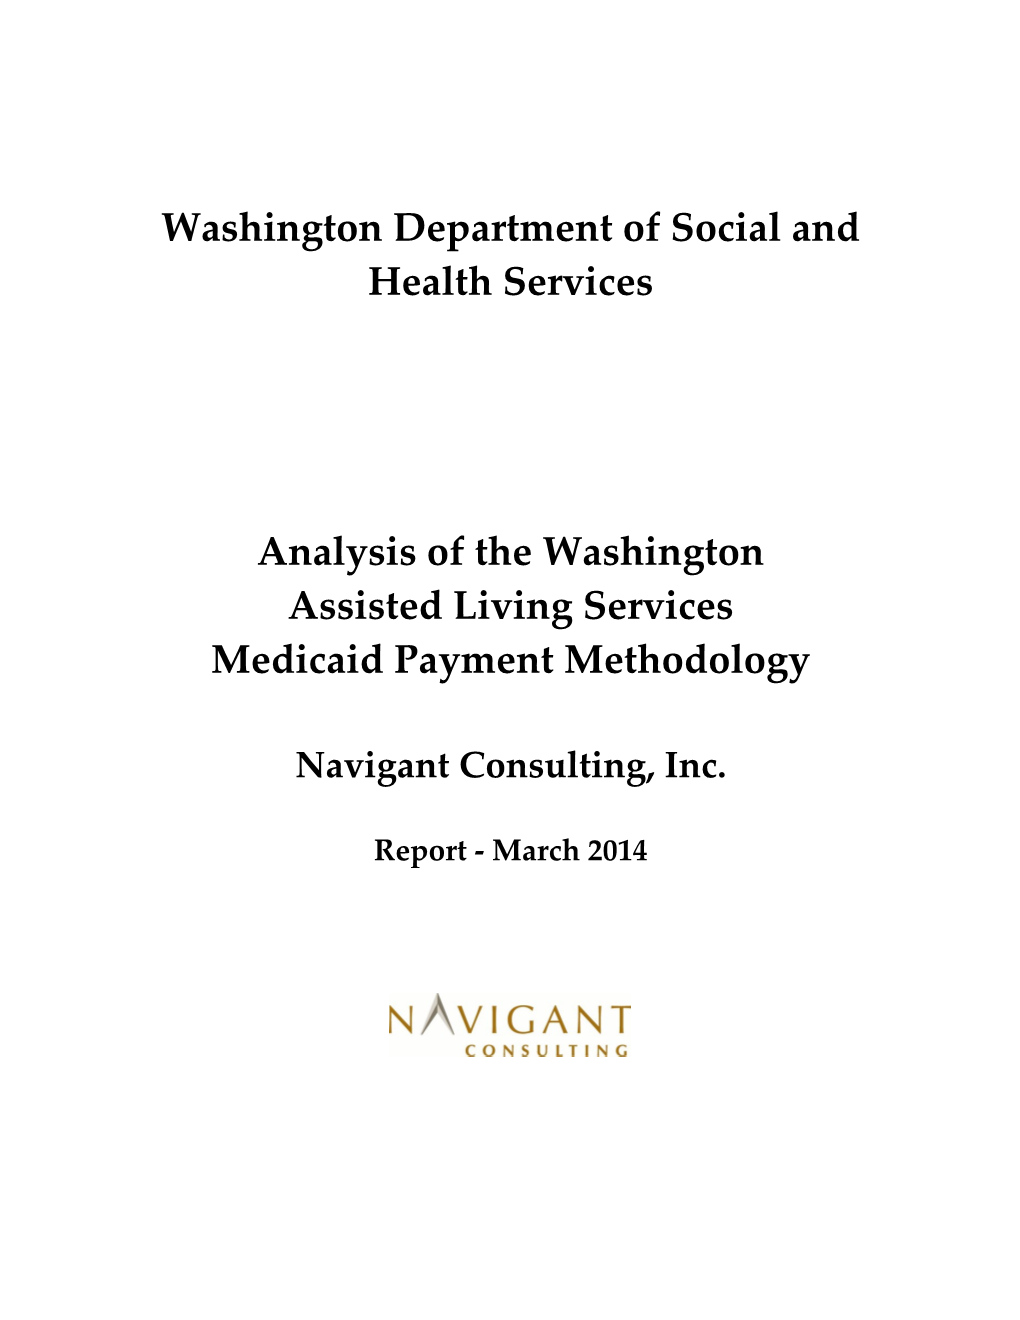 Washington Department of Social and Health Services, Aging and Disability Services